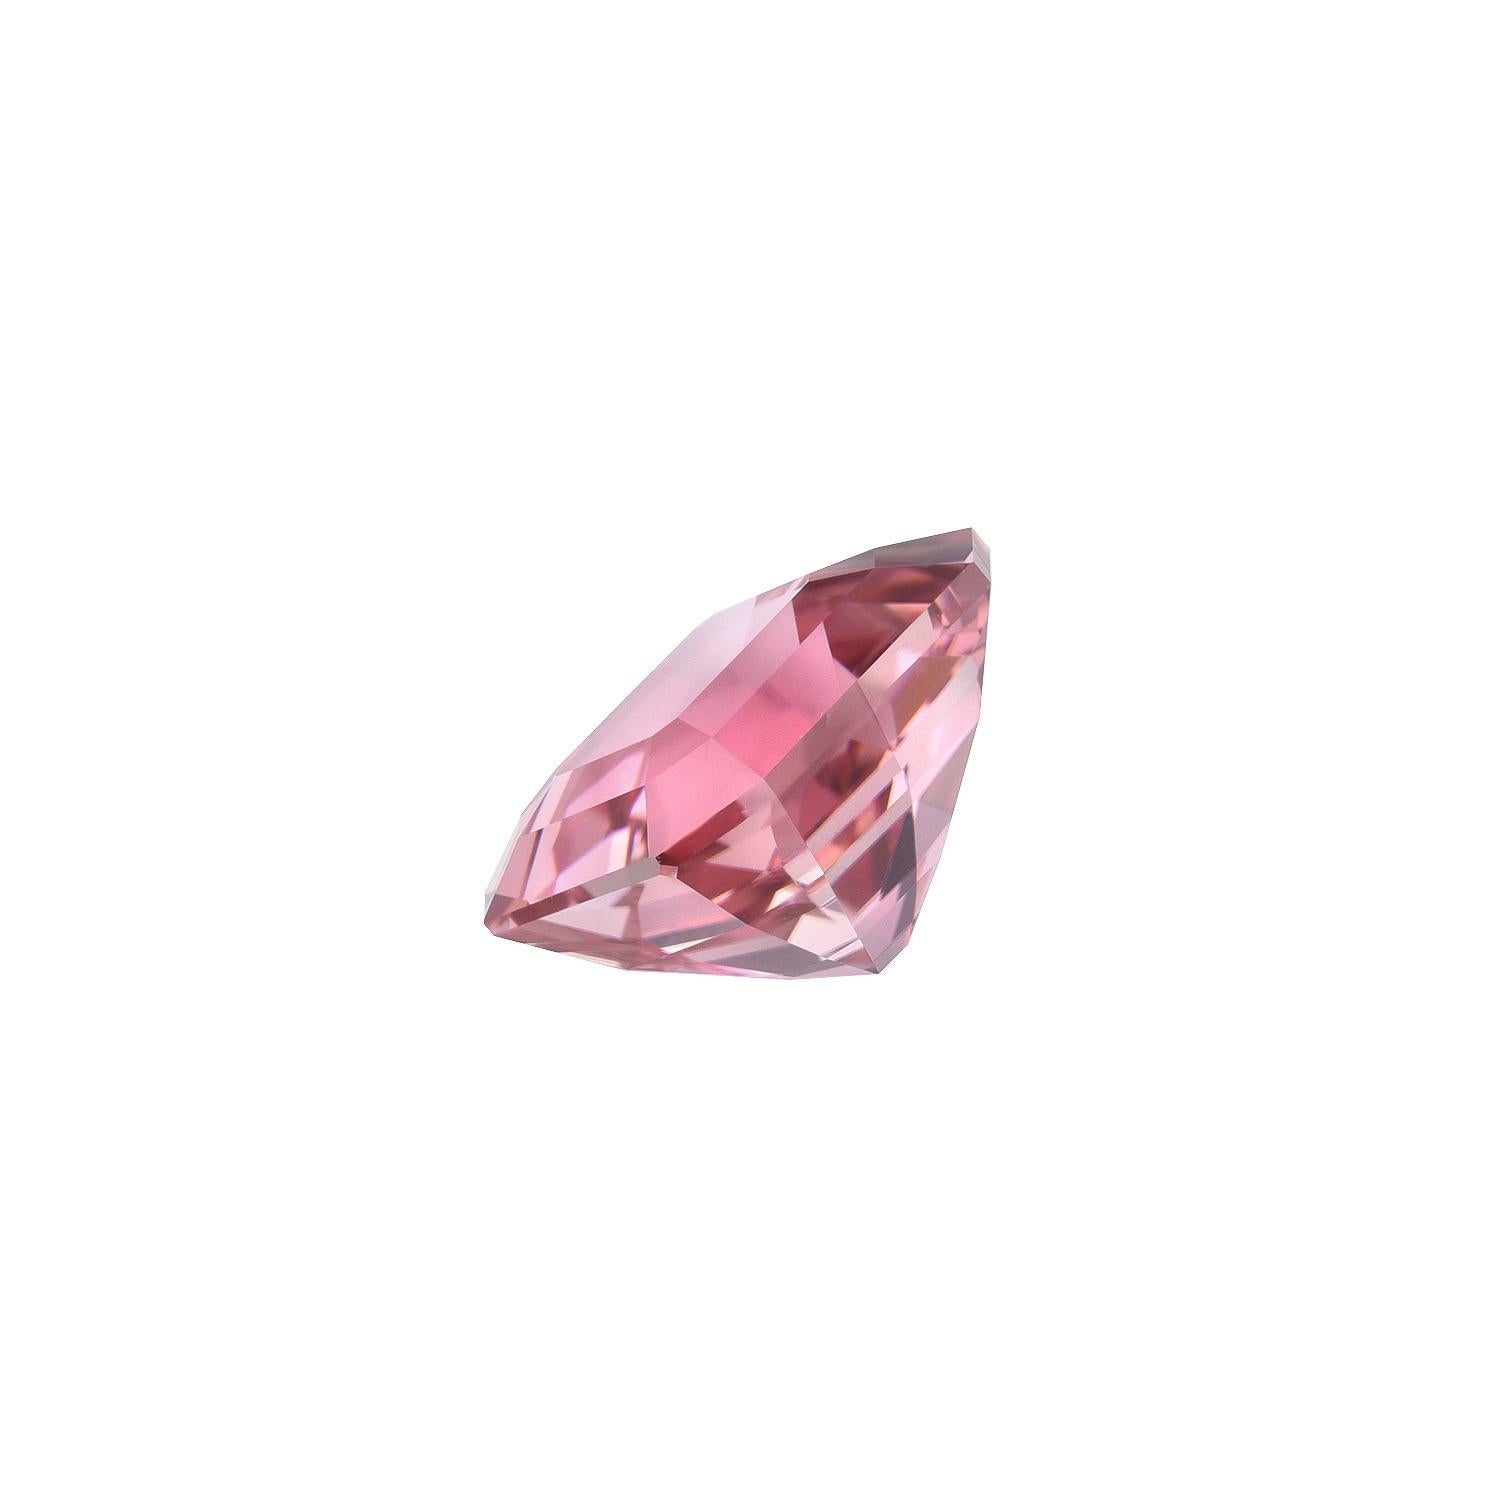 Pristine 3.18 carat Pink Tourmaline emerald cut loose gemstone, offered unmounted to a fine gemstone lover.
Dimensions: 9.3 x 8.3 mm.
Returns are accepted and paid by us within 7 days of delivery.
We offer supreme custom jewelry work upon request.